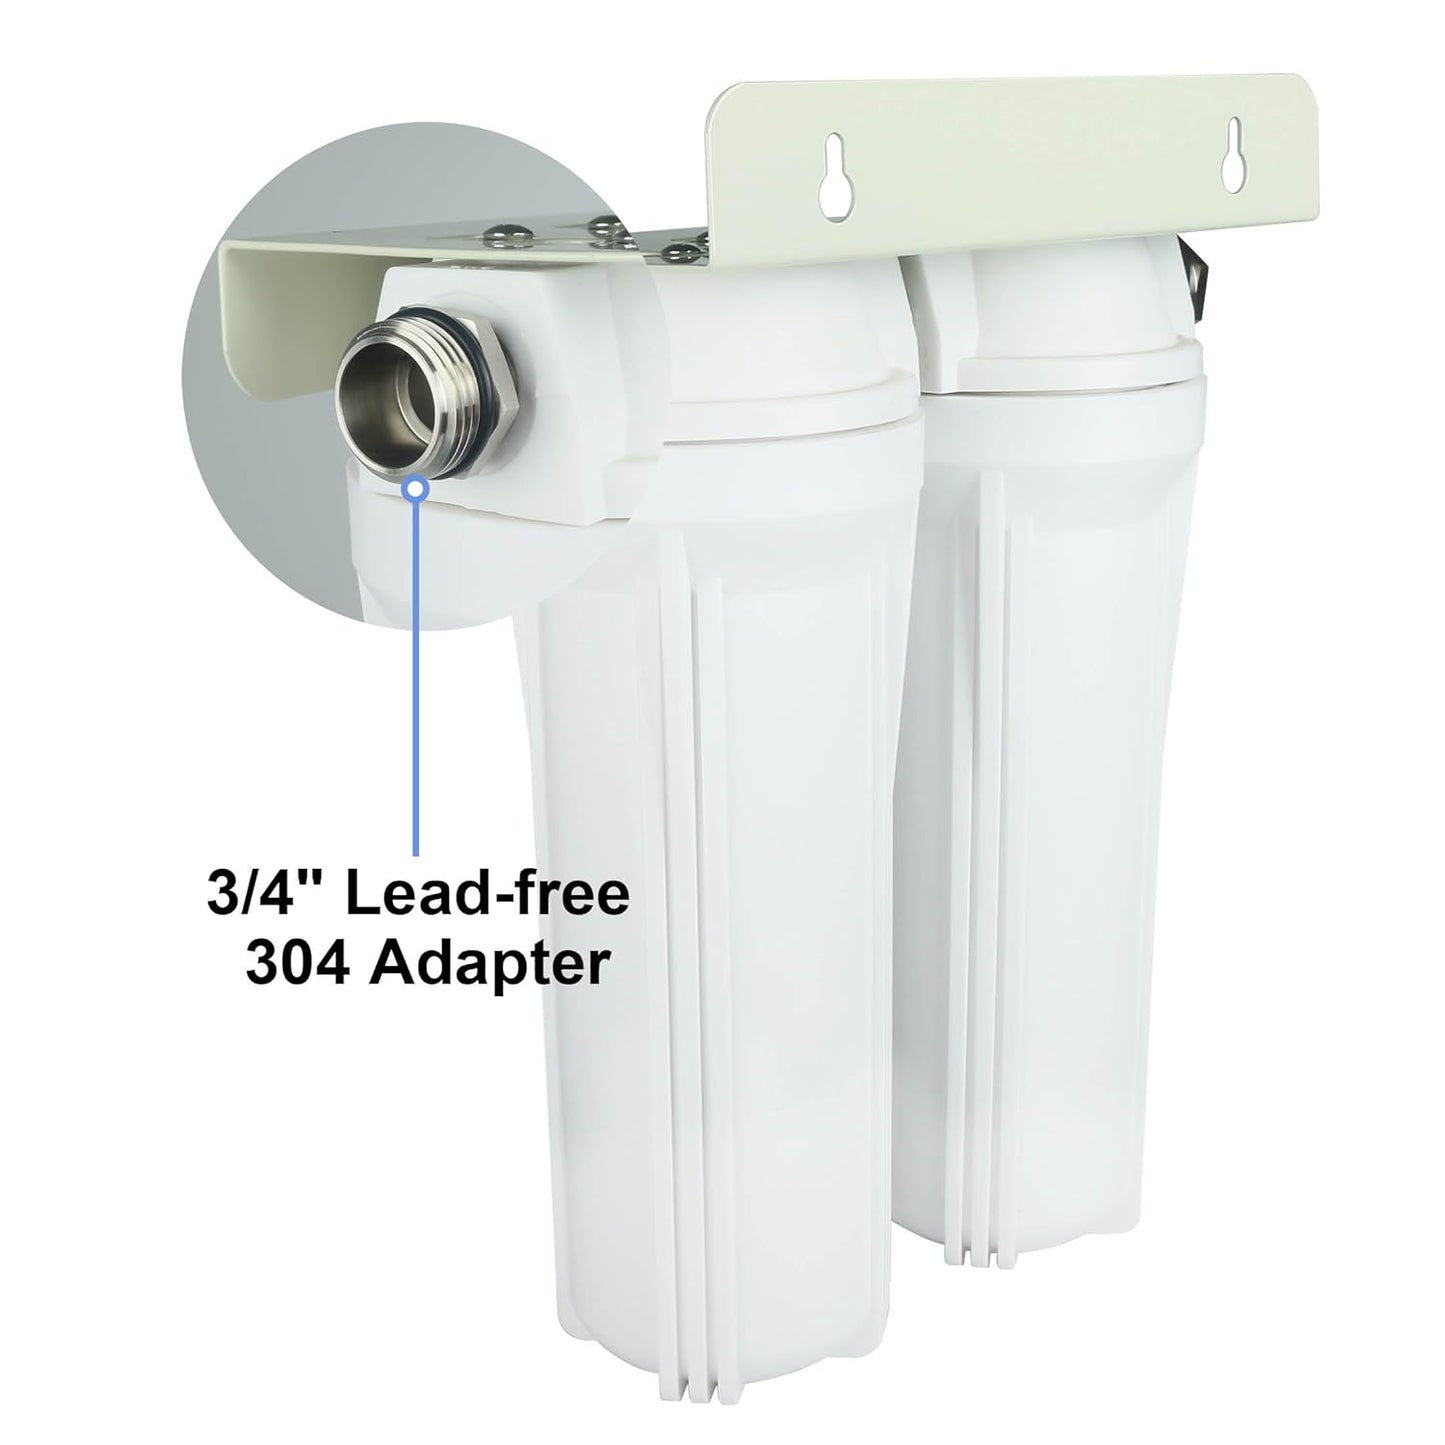 2 Stage Water Filter System